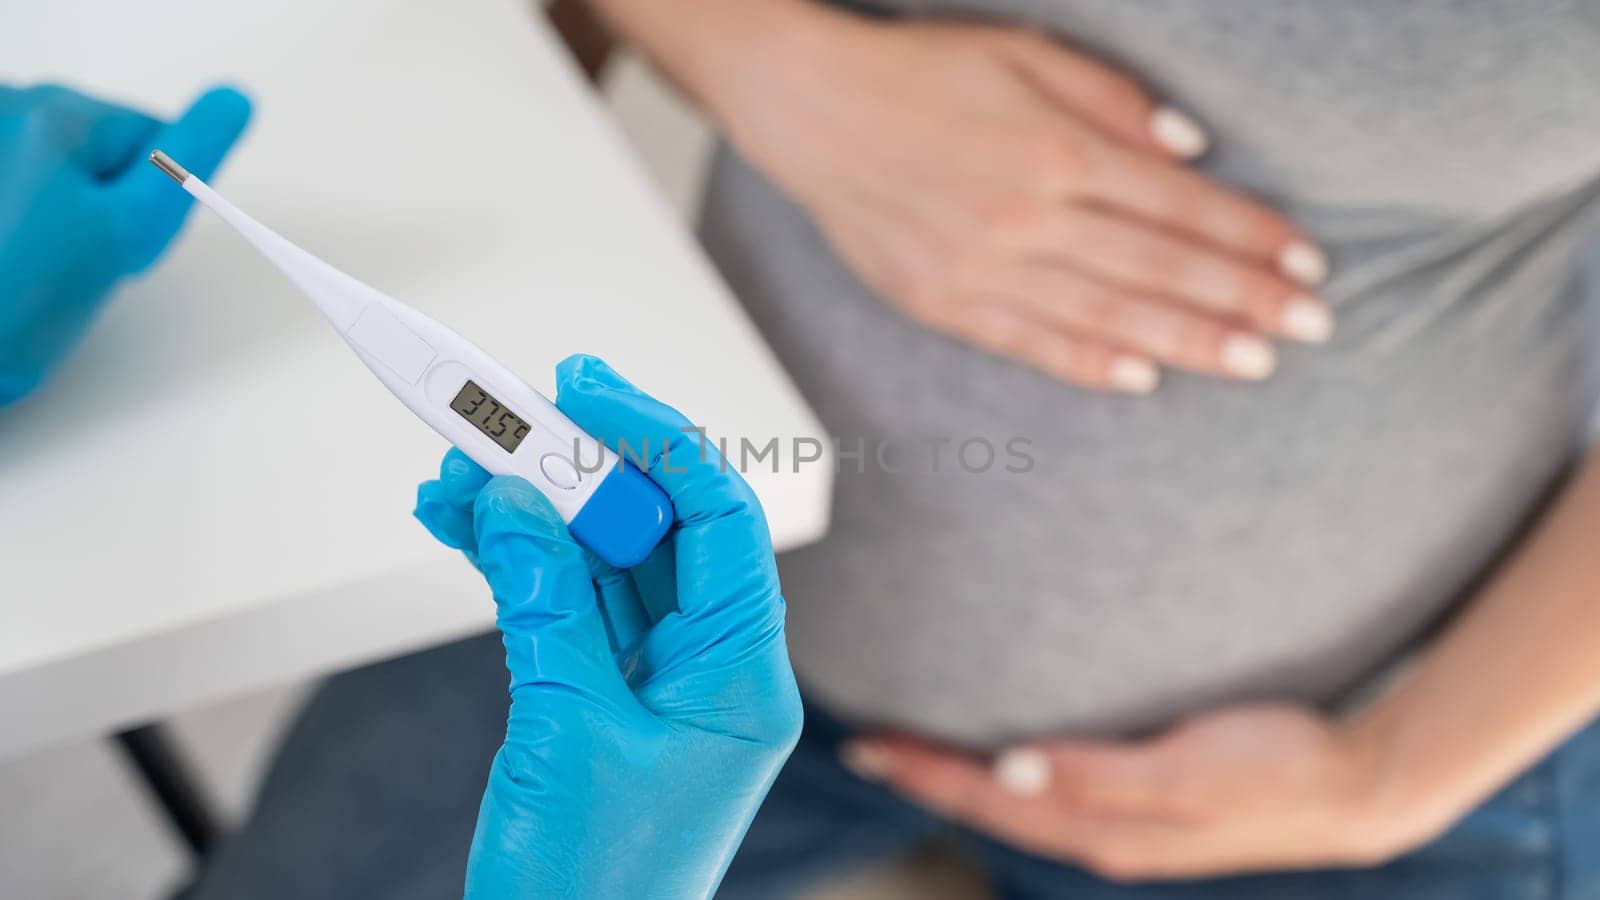 Pregnant woman with fever at doctor's appointment. Therapist holds an electronic thermometer with a temperature of 37.5. by mrwed54